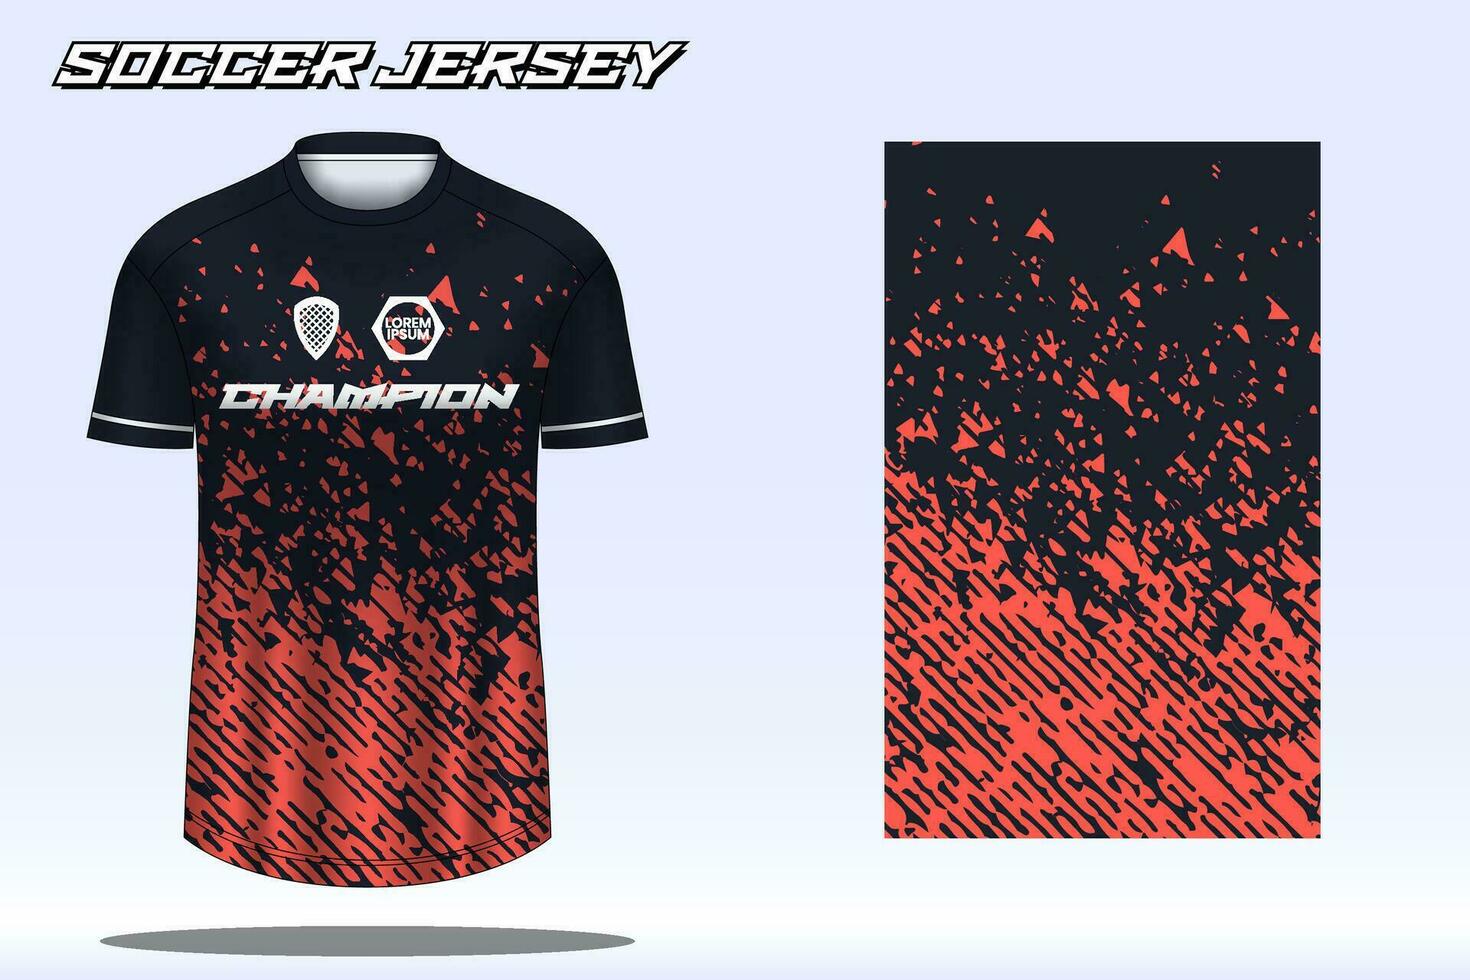 Soccer jersey mockup for football club. Vector sublimation sports apparel design. Uniform front view templates football jersey.